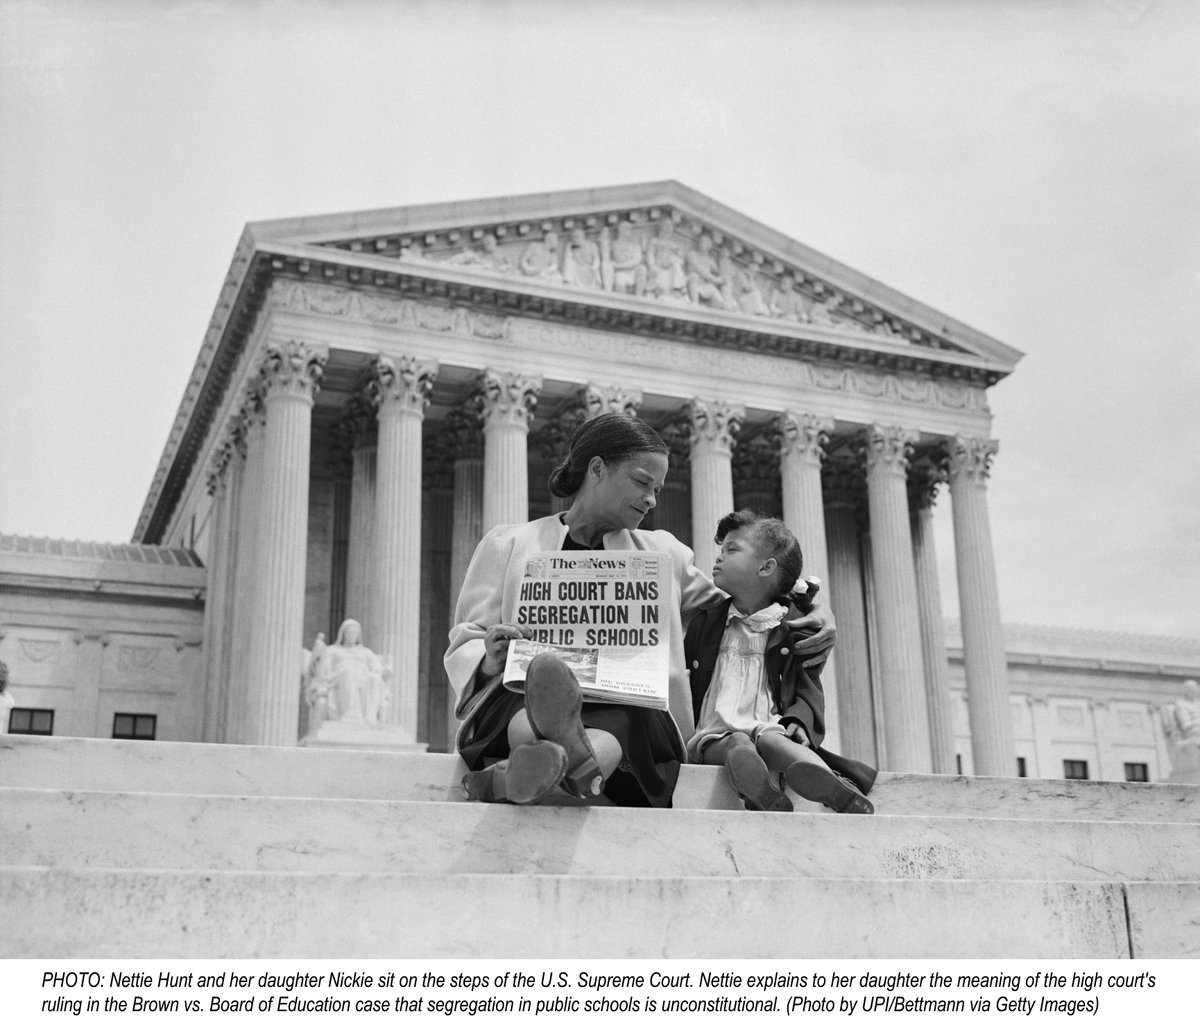 Today marks 70 years since Brown v. Board of Education ended school segregation. Despite early progress, racial isolation in schools persists. Read more in this compelling article by Prof. @SteveWermiel - tinyurl.com/BrownvBOE70th